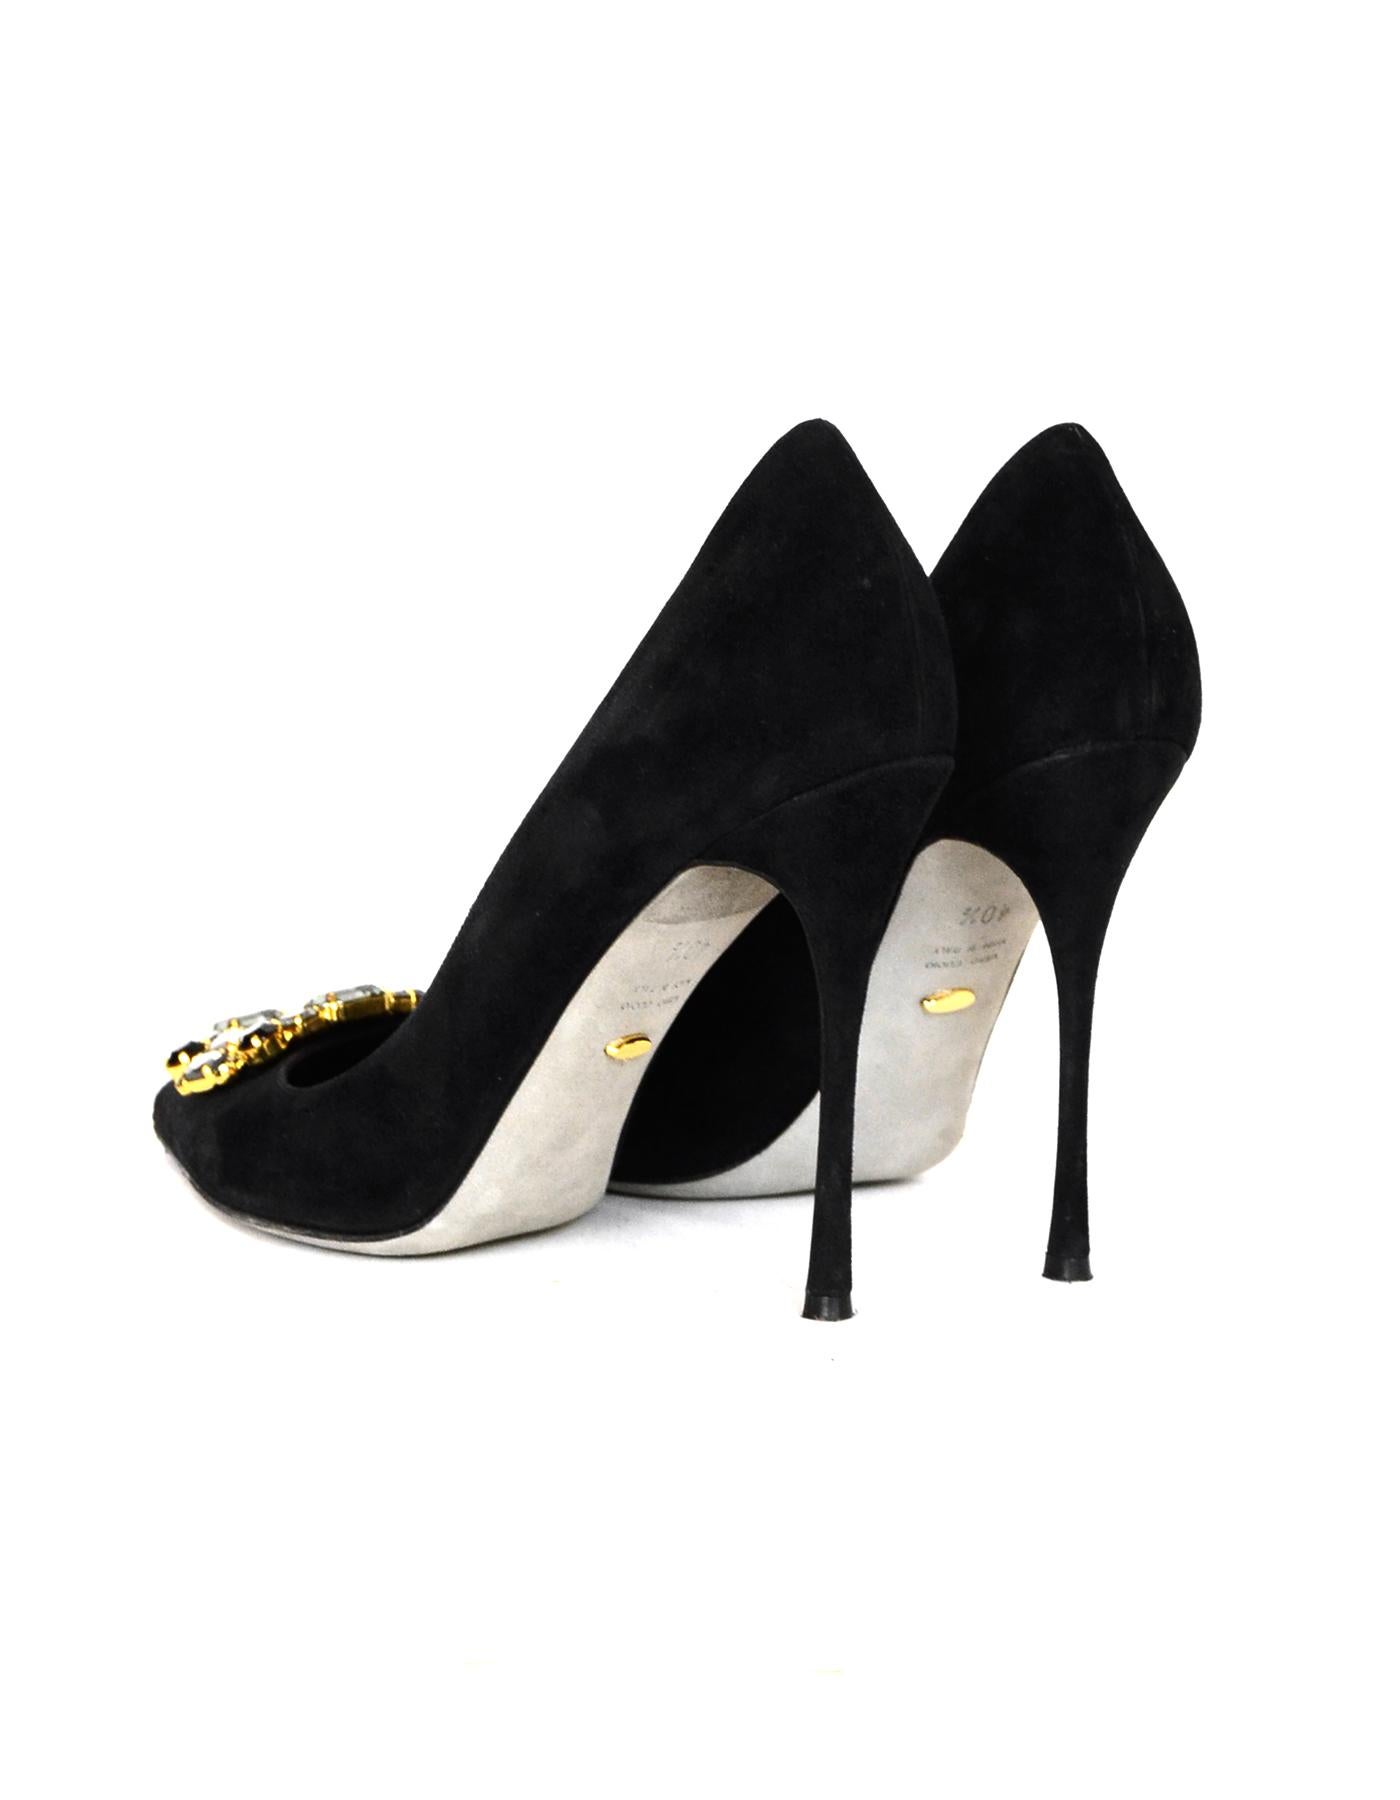 Sergio Rossi Black Suede Crystal Embellished Pumps Sz 40.5 In Excellent Condition In New York, NY